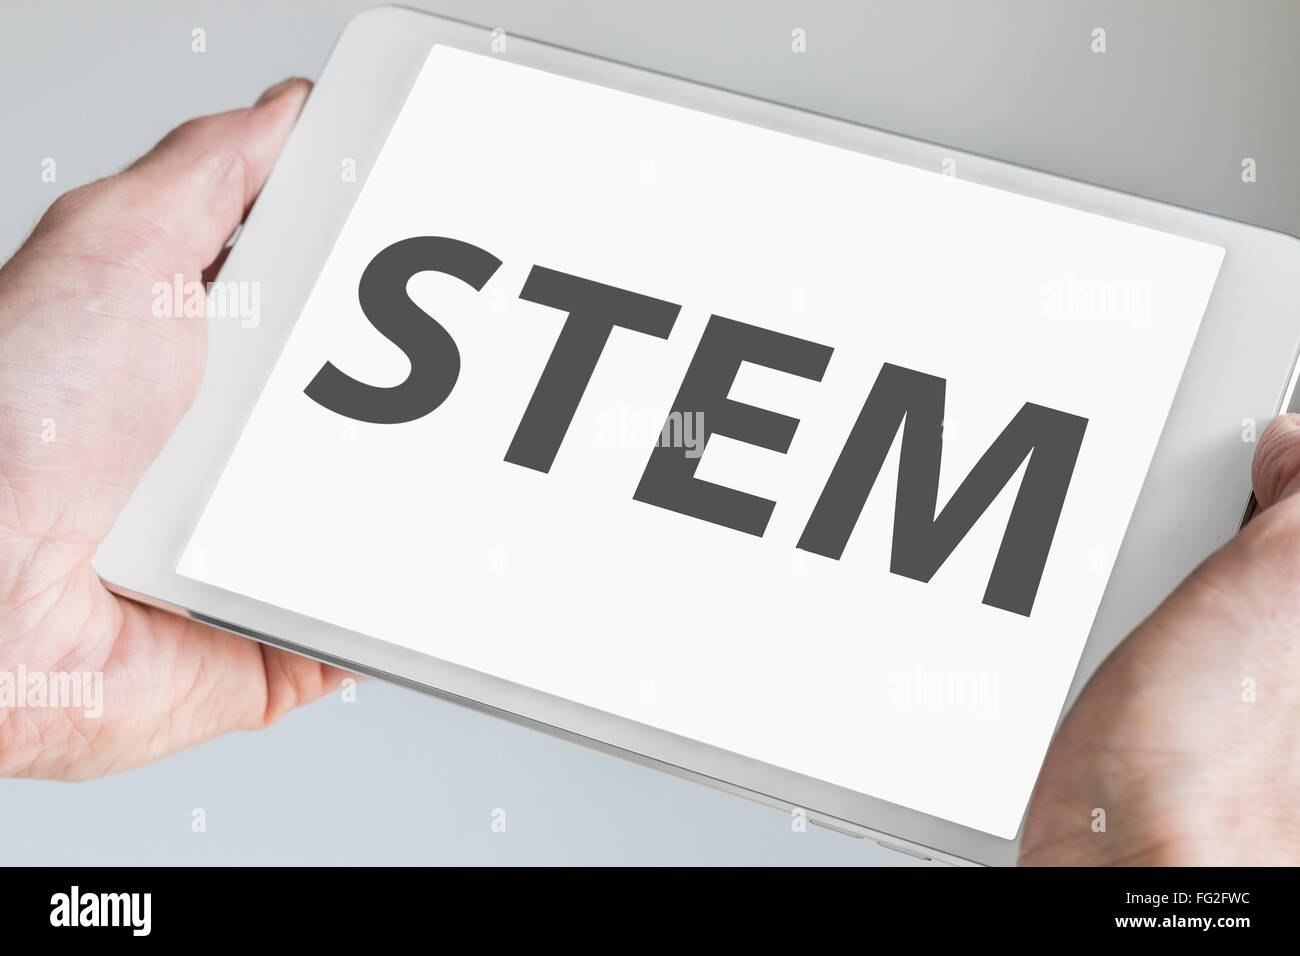 STEM (science, technology, engineering, math) concept with text being displayed on modern touch screen of a white tablet. Stock Photo